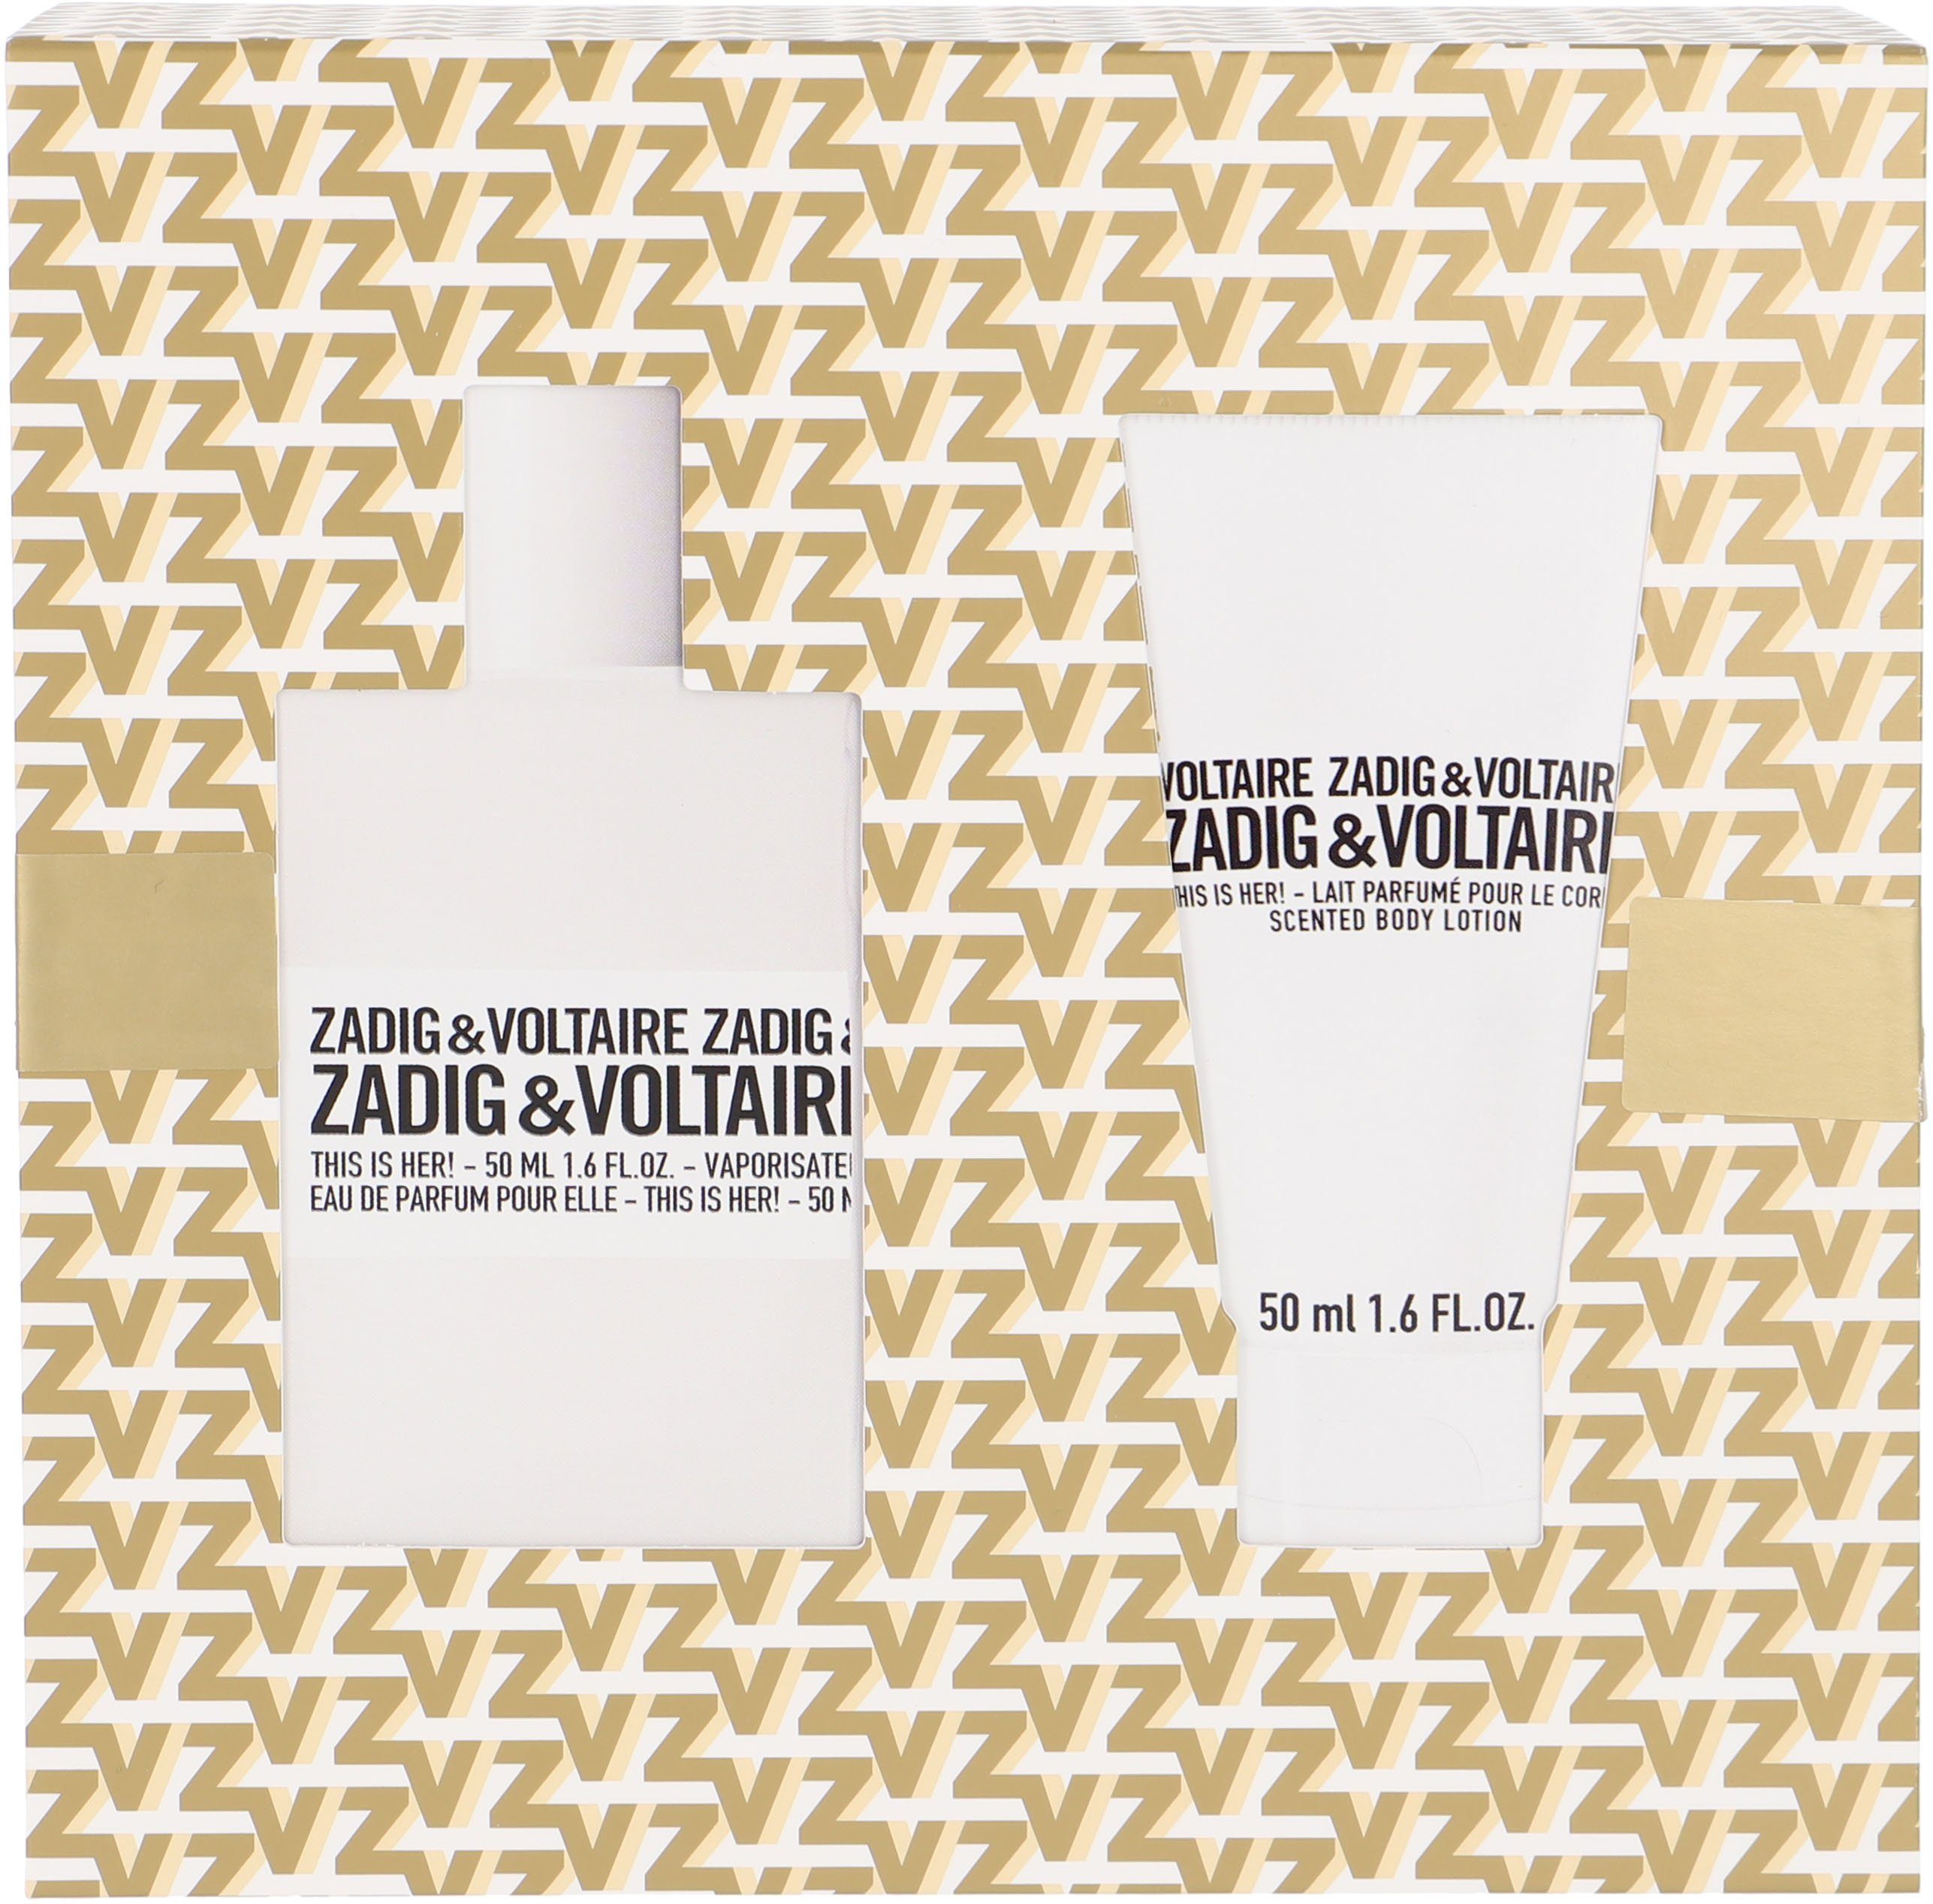 ZADIG & VOLTAIRE Duft-Set Her!, This is 2-tlg